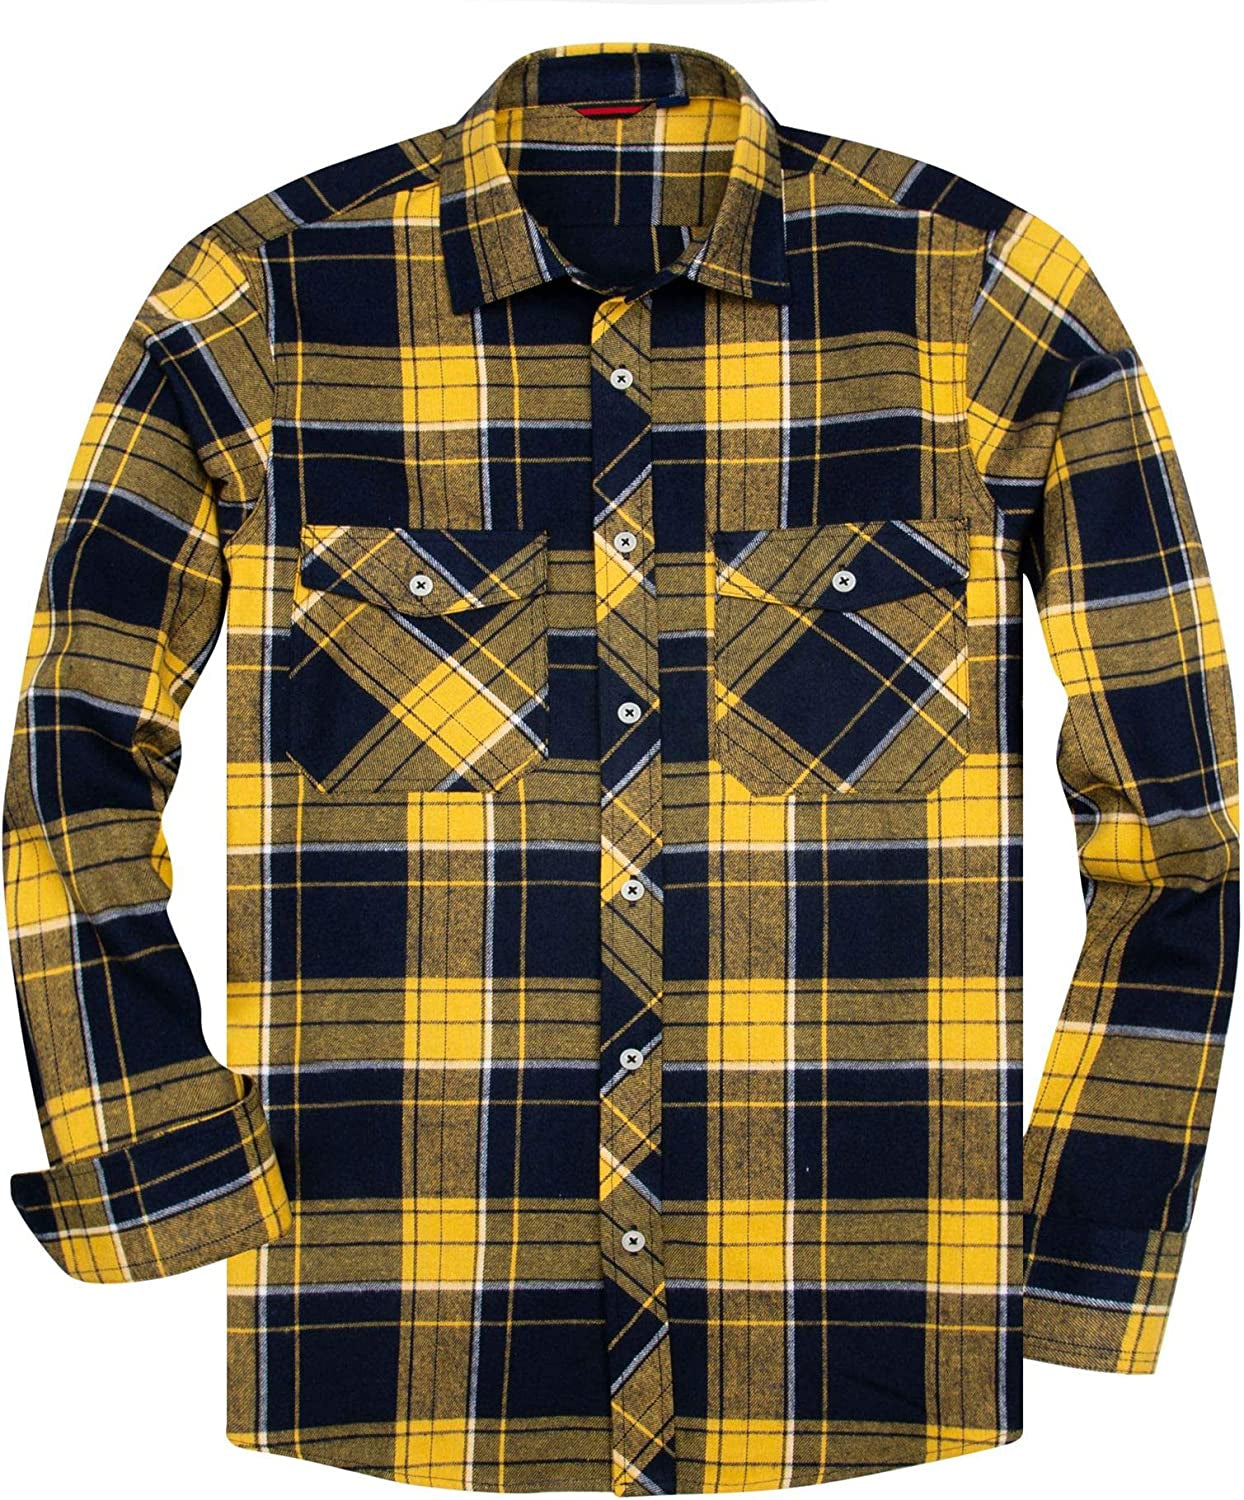 Men'S Button down Regular Fit Long Sleeve Plaid Flannel Casual Shirts